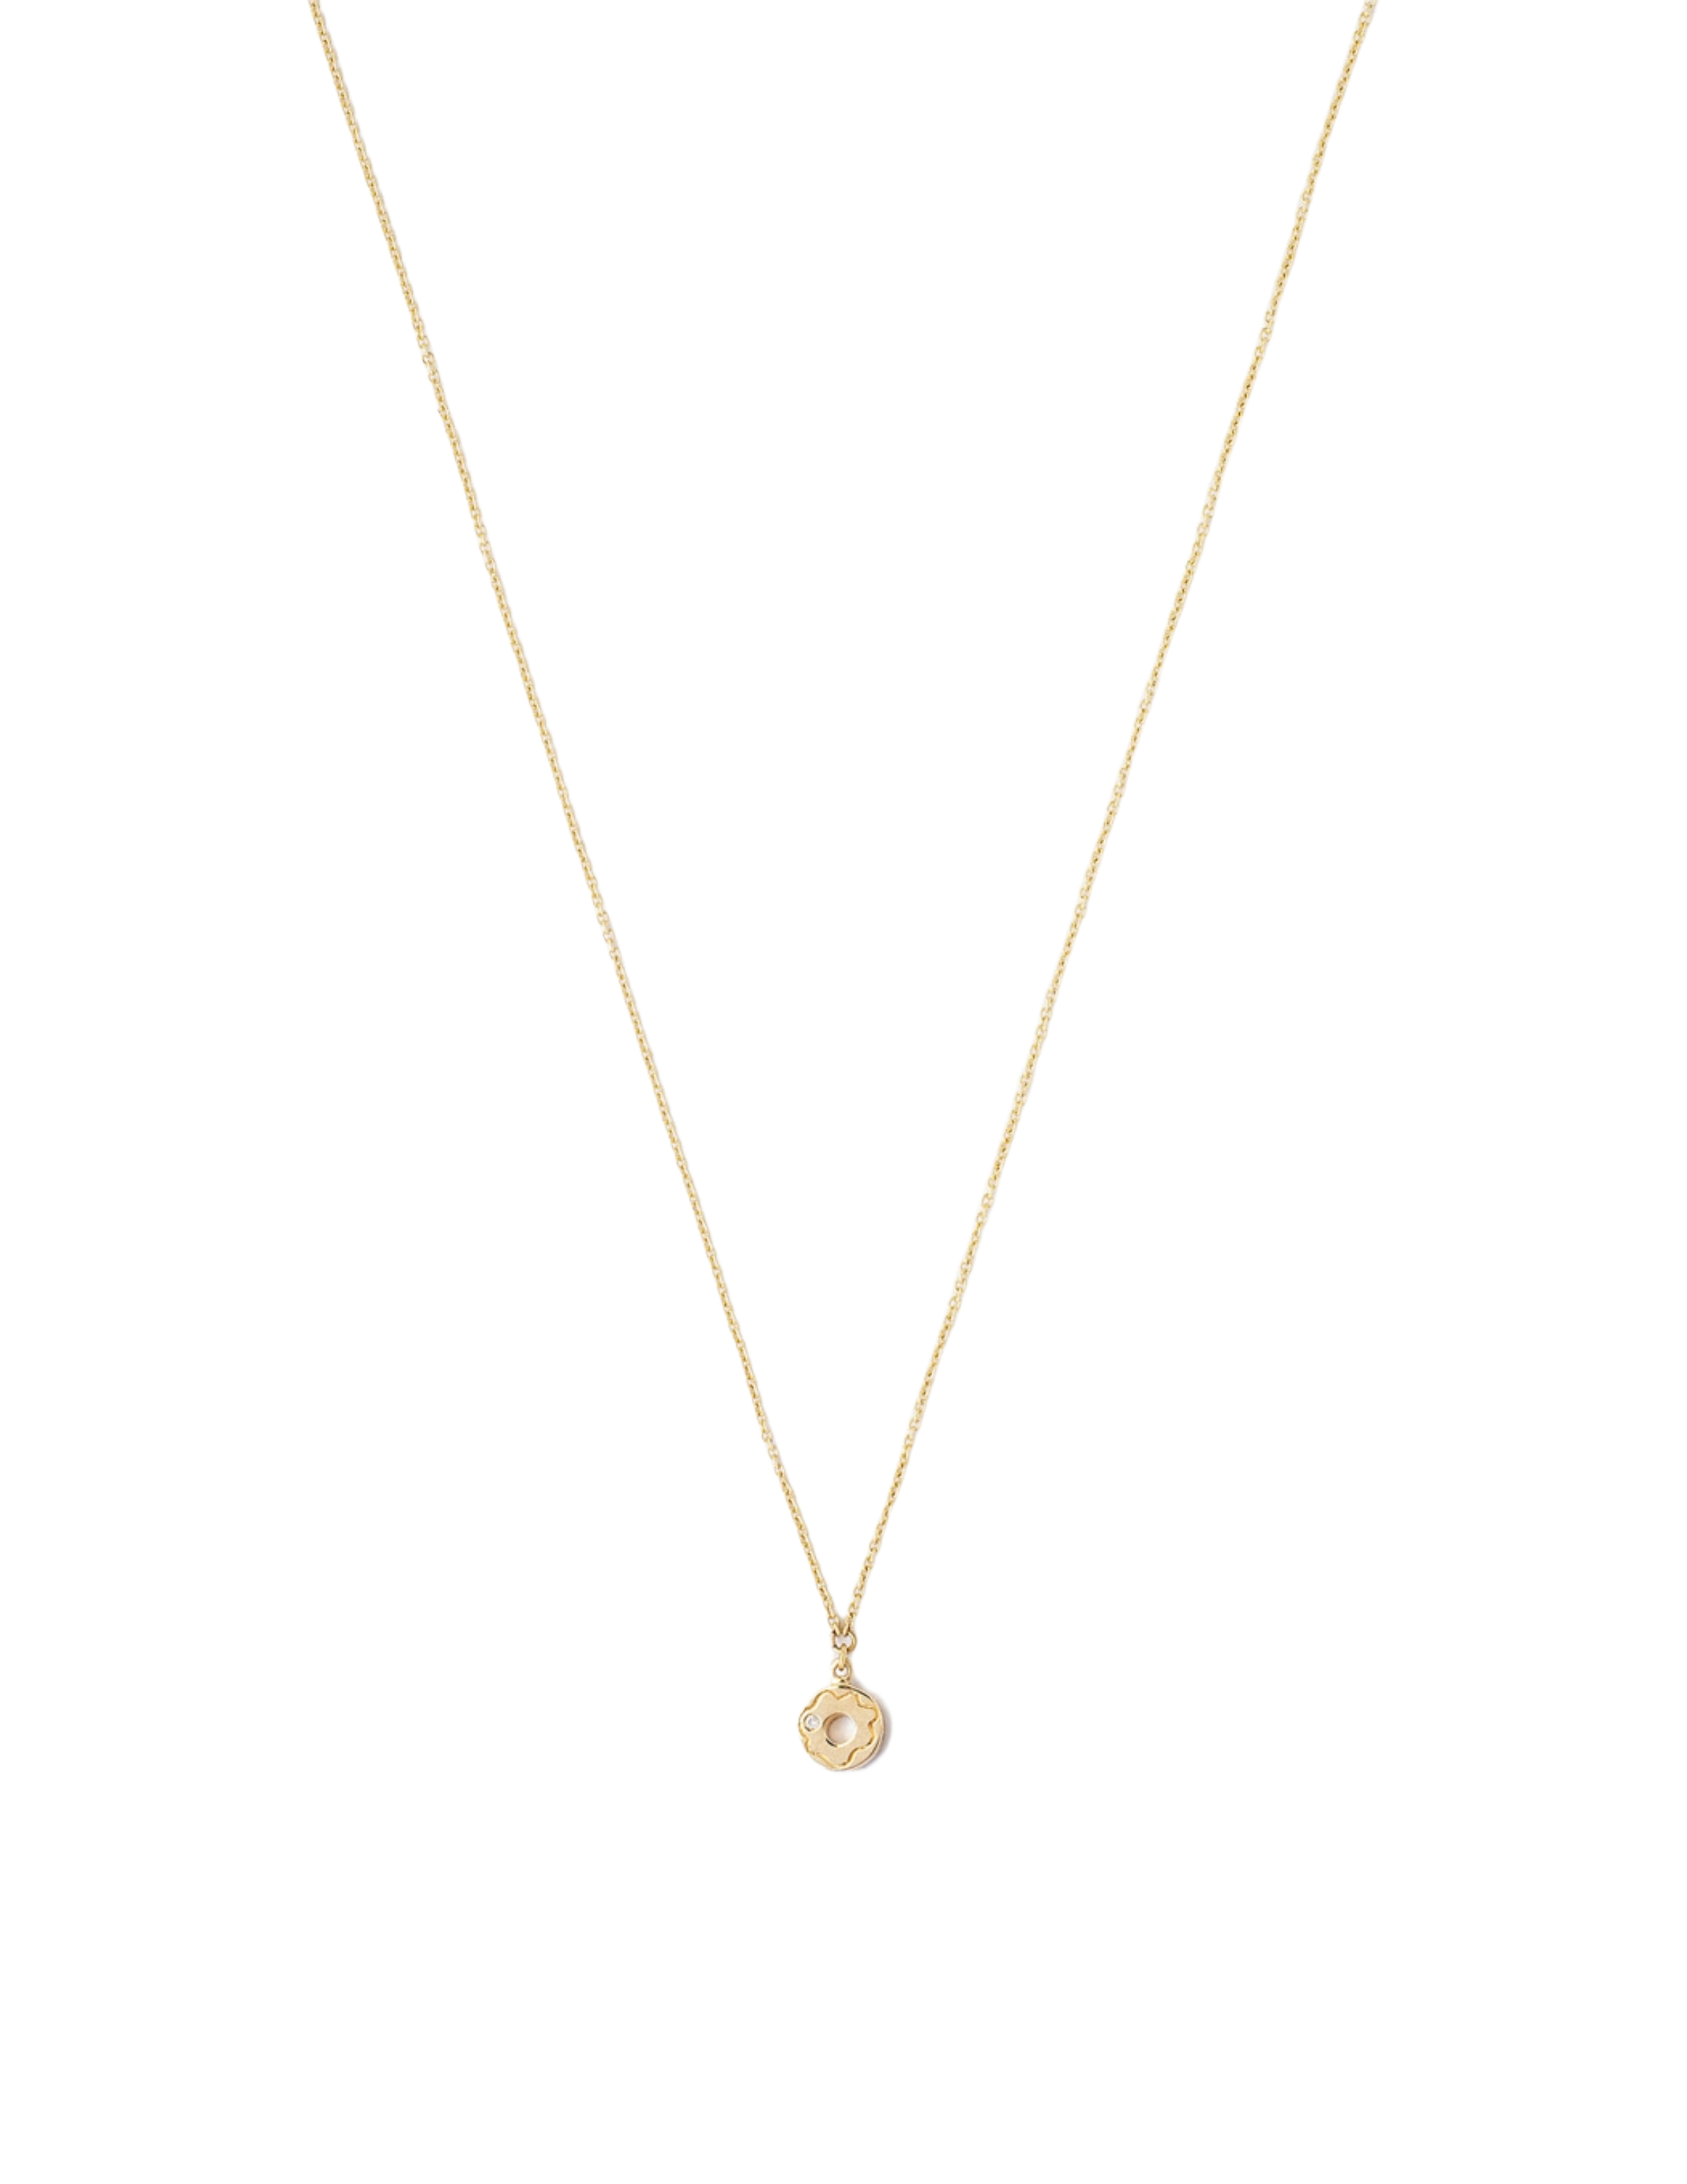 Gold Donut Necklace with Diamond Inlay